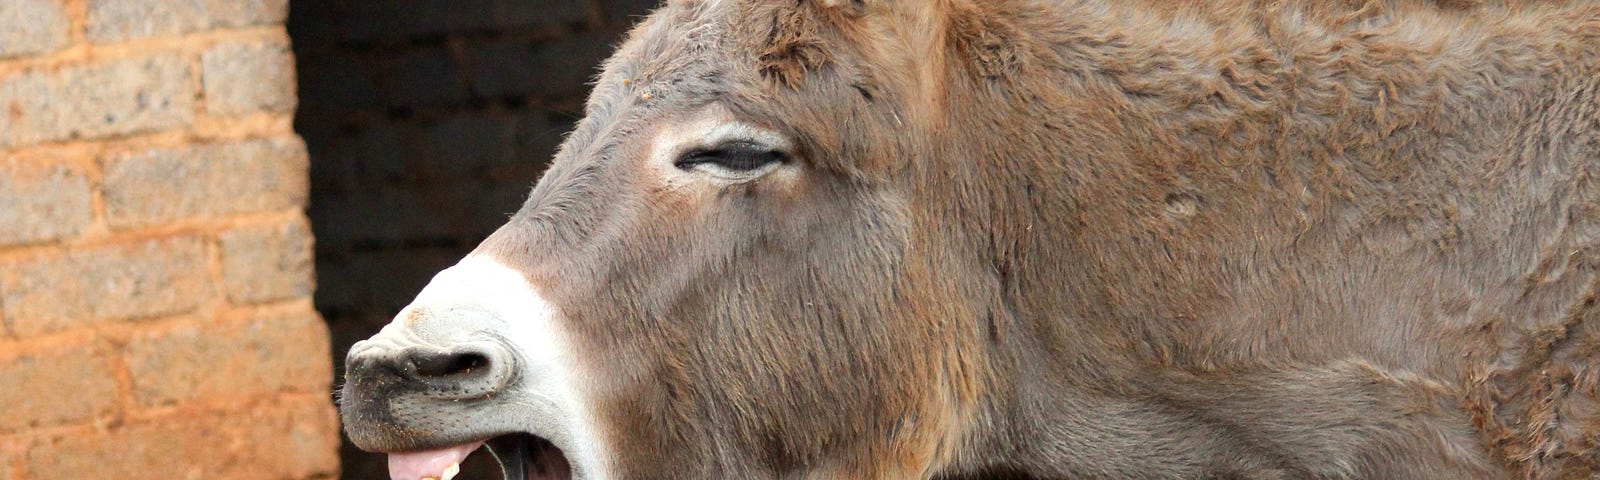 A donkey appears to be laughing